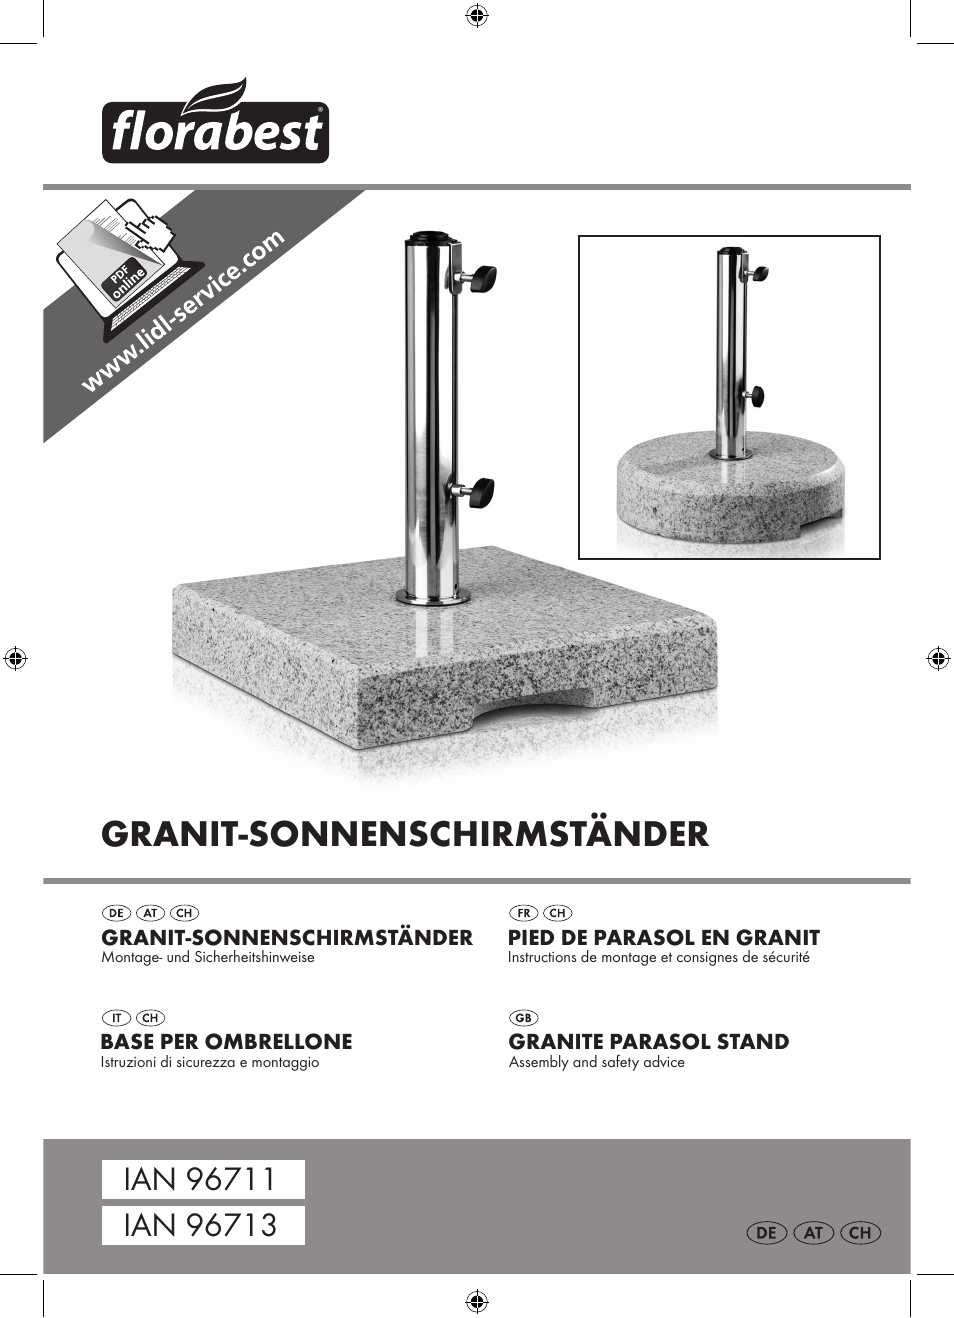 Florabest Granite Parasol Stand User Manual | 13 pages